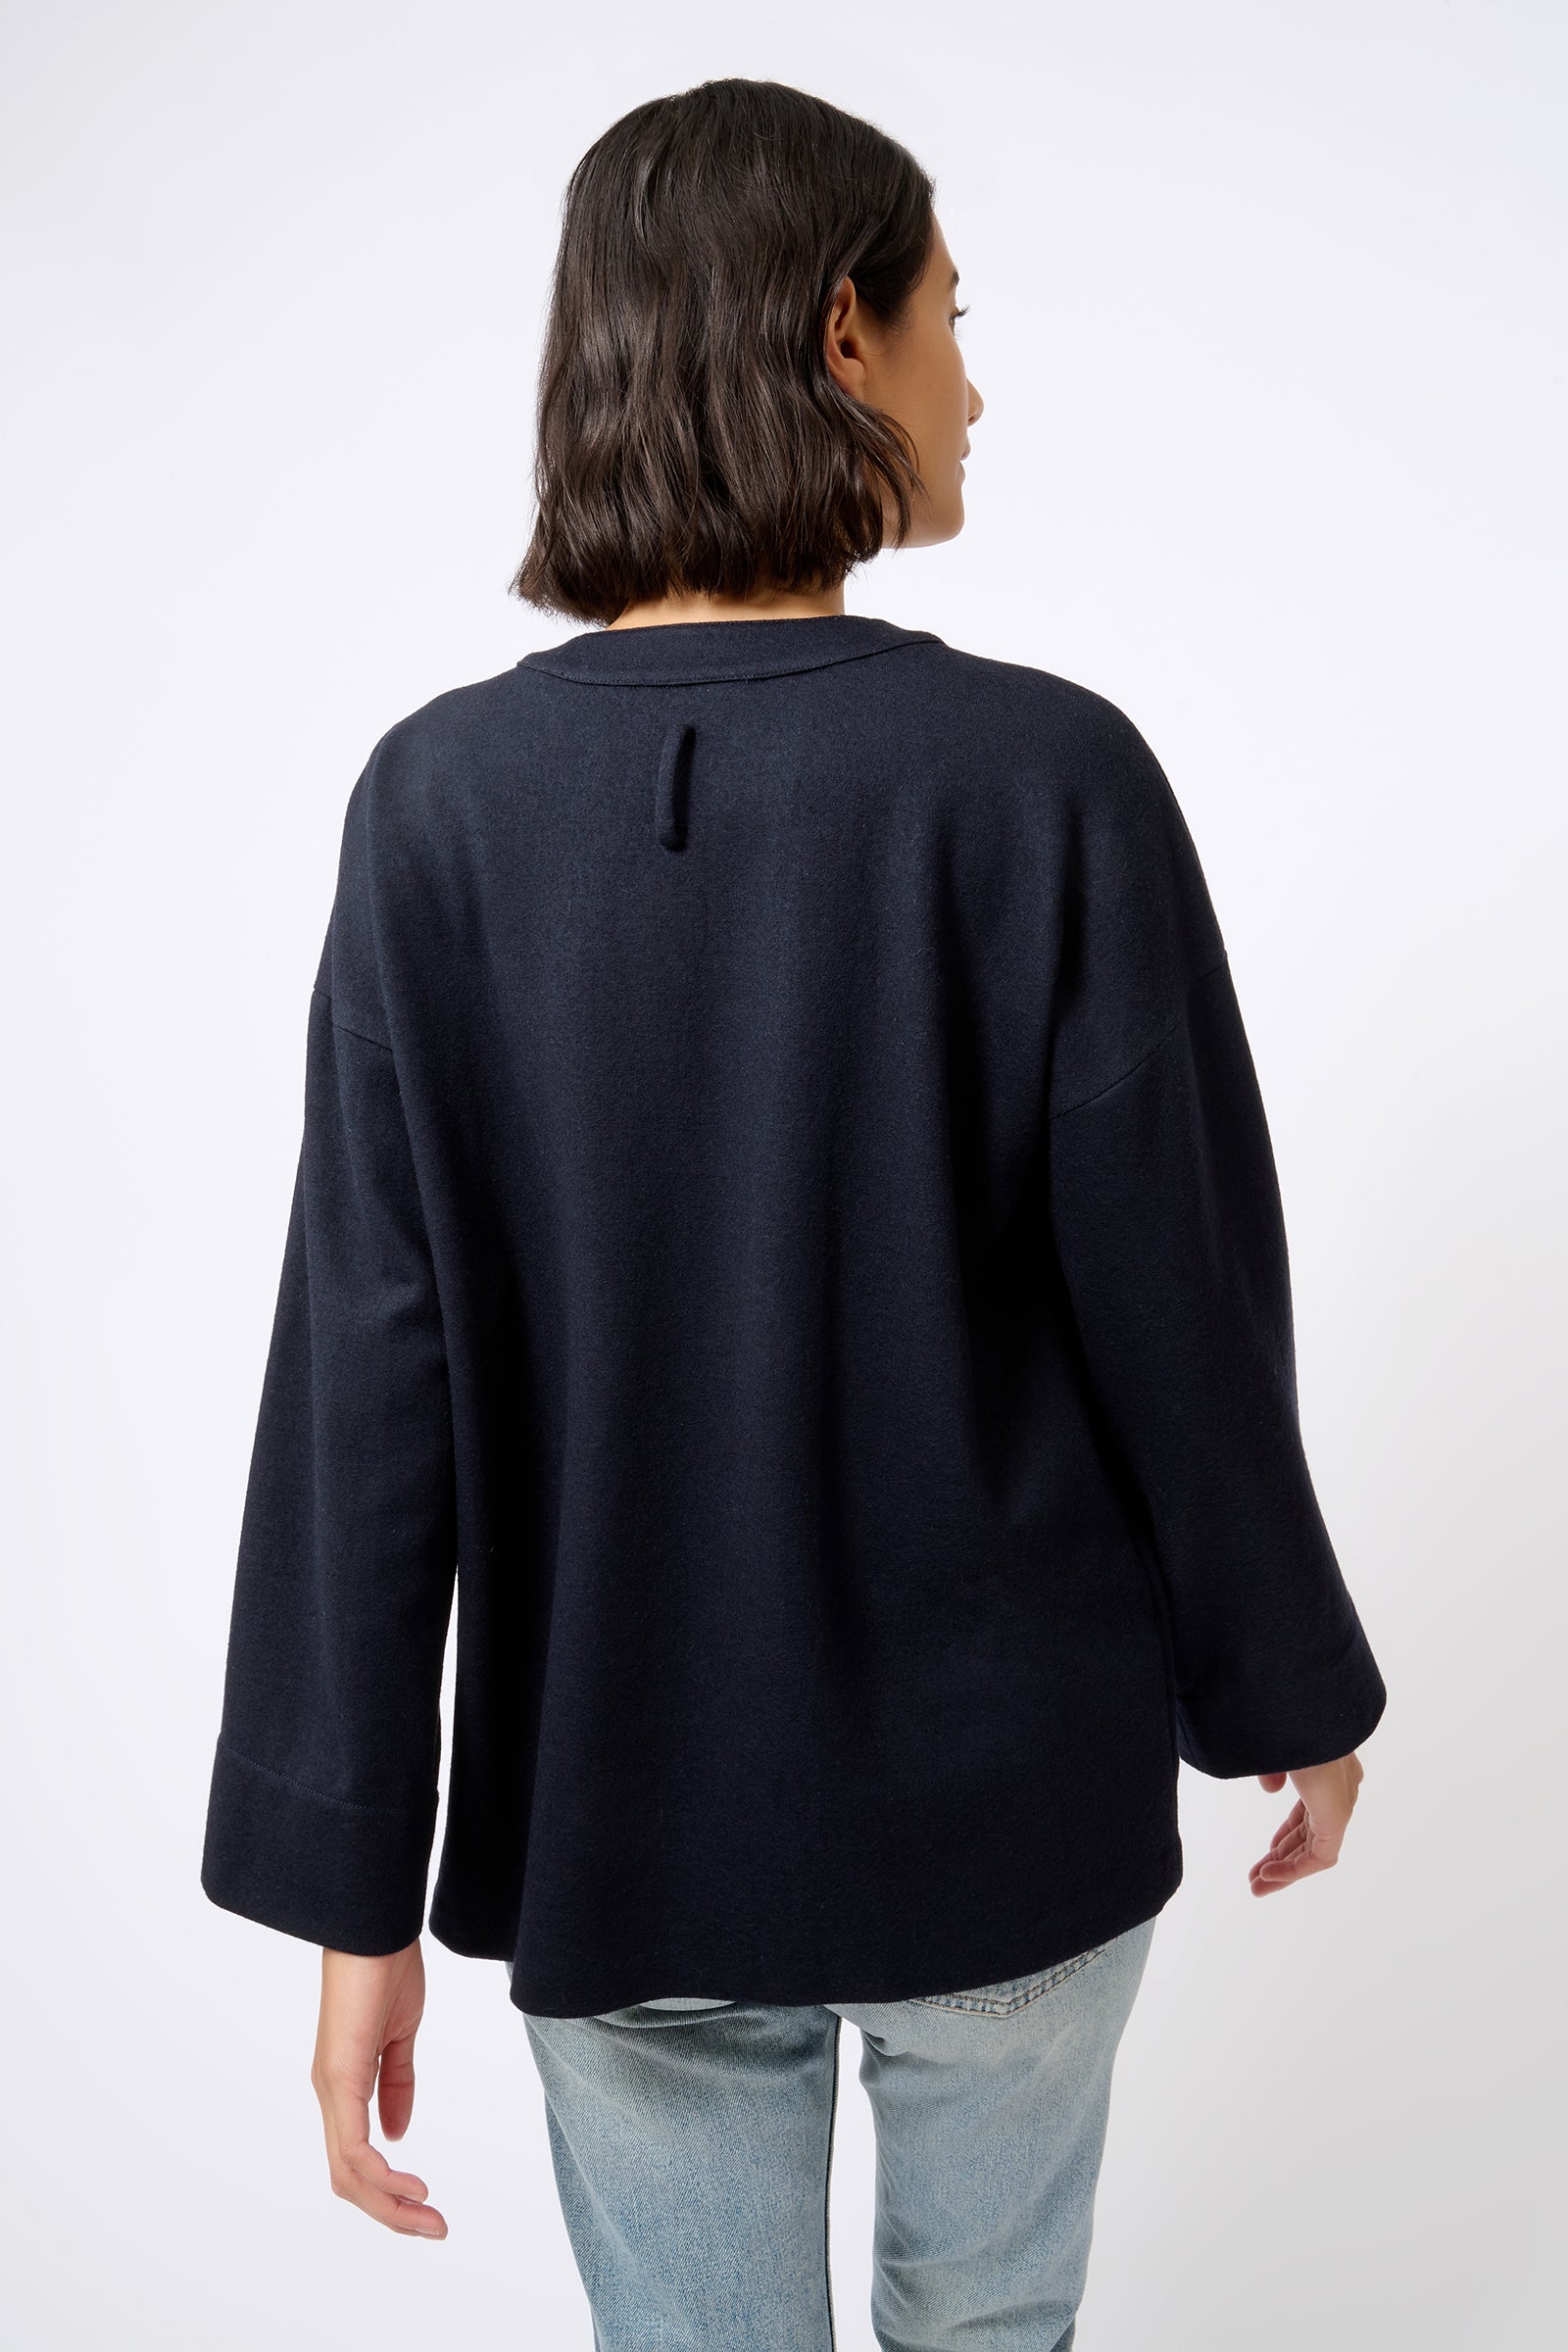 Kal Rieman Band Collar Top in Midnight on Model Back View